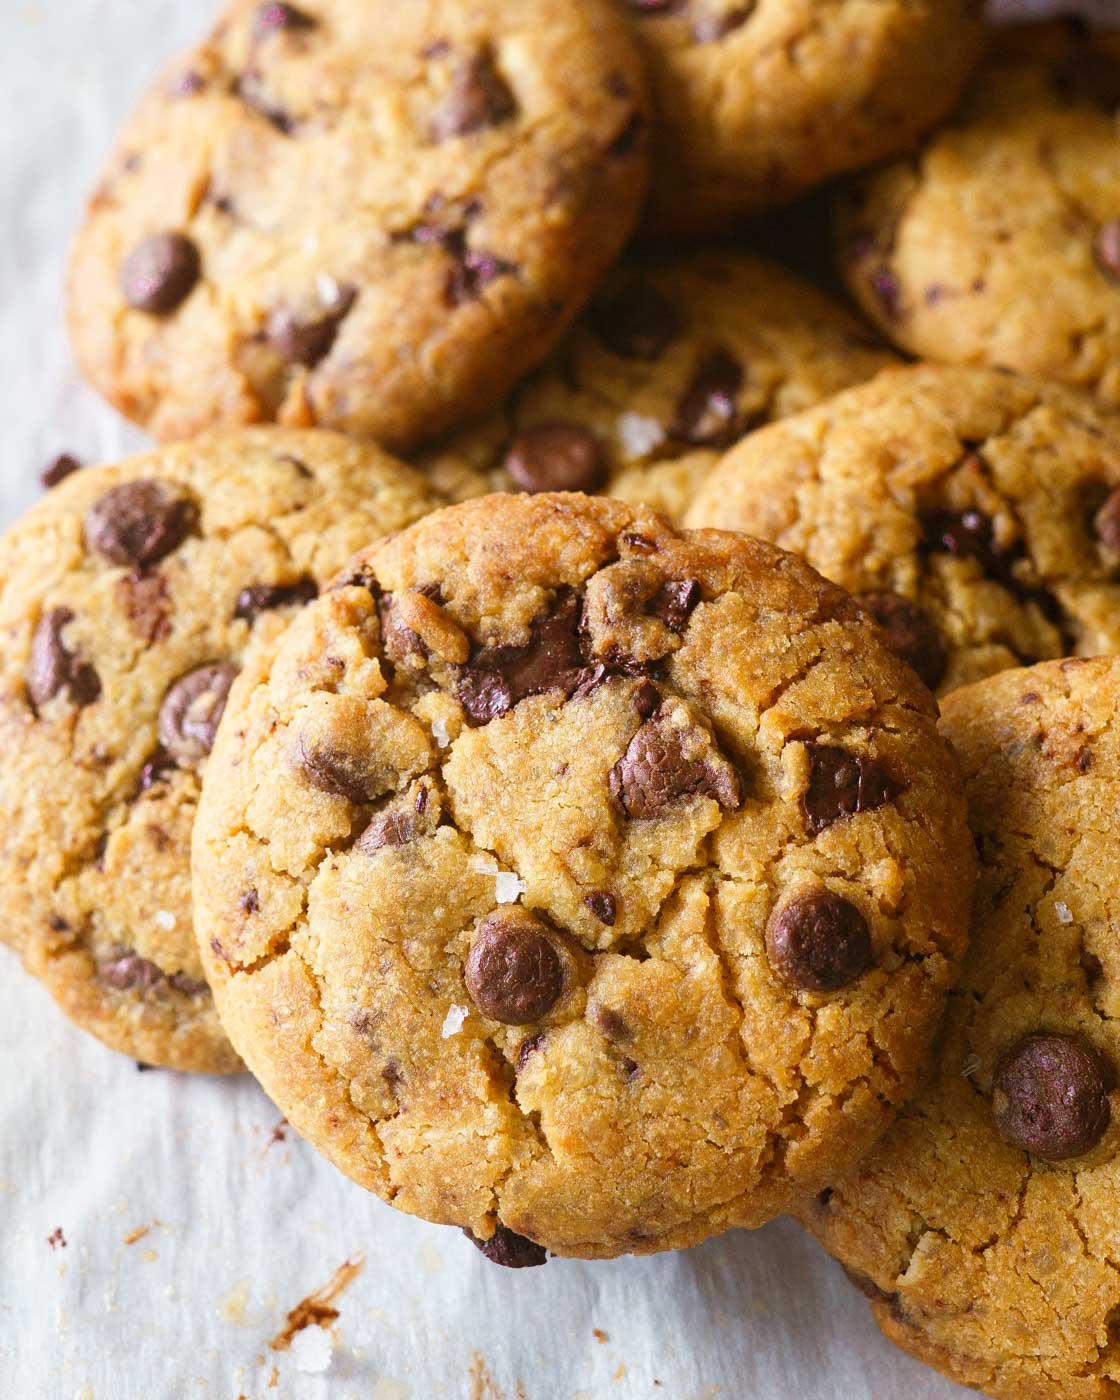 https://www.yellowthyme.com/wp-content/uploads/2022/12/Eggless-Chocolate-chip-brown-butter-cookies-3.jpg